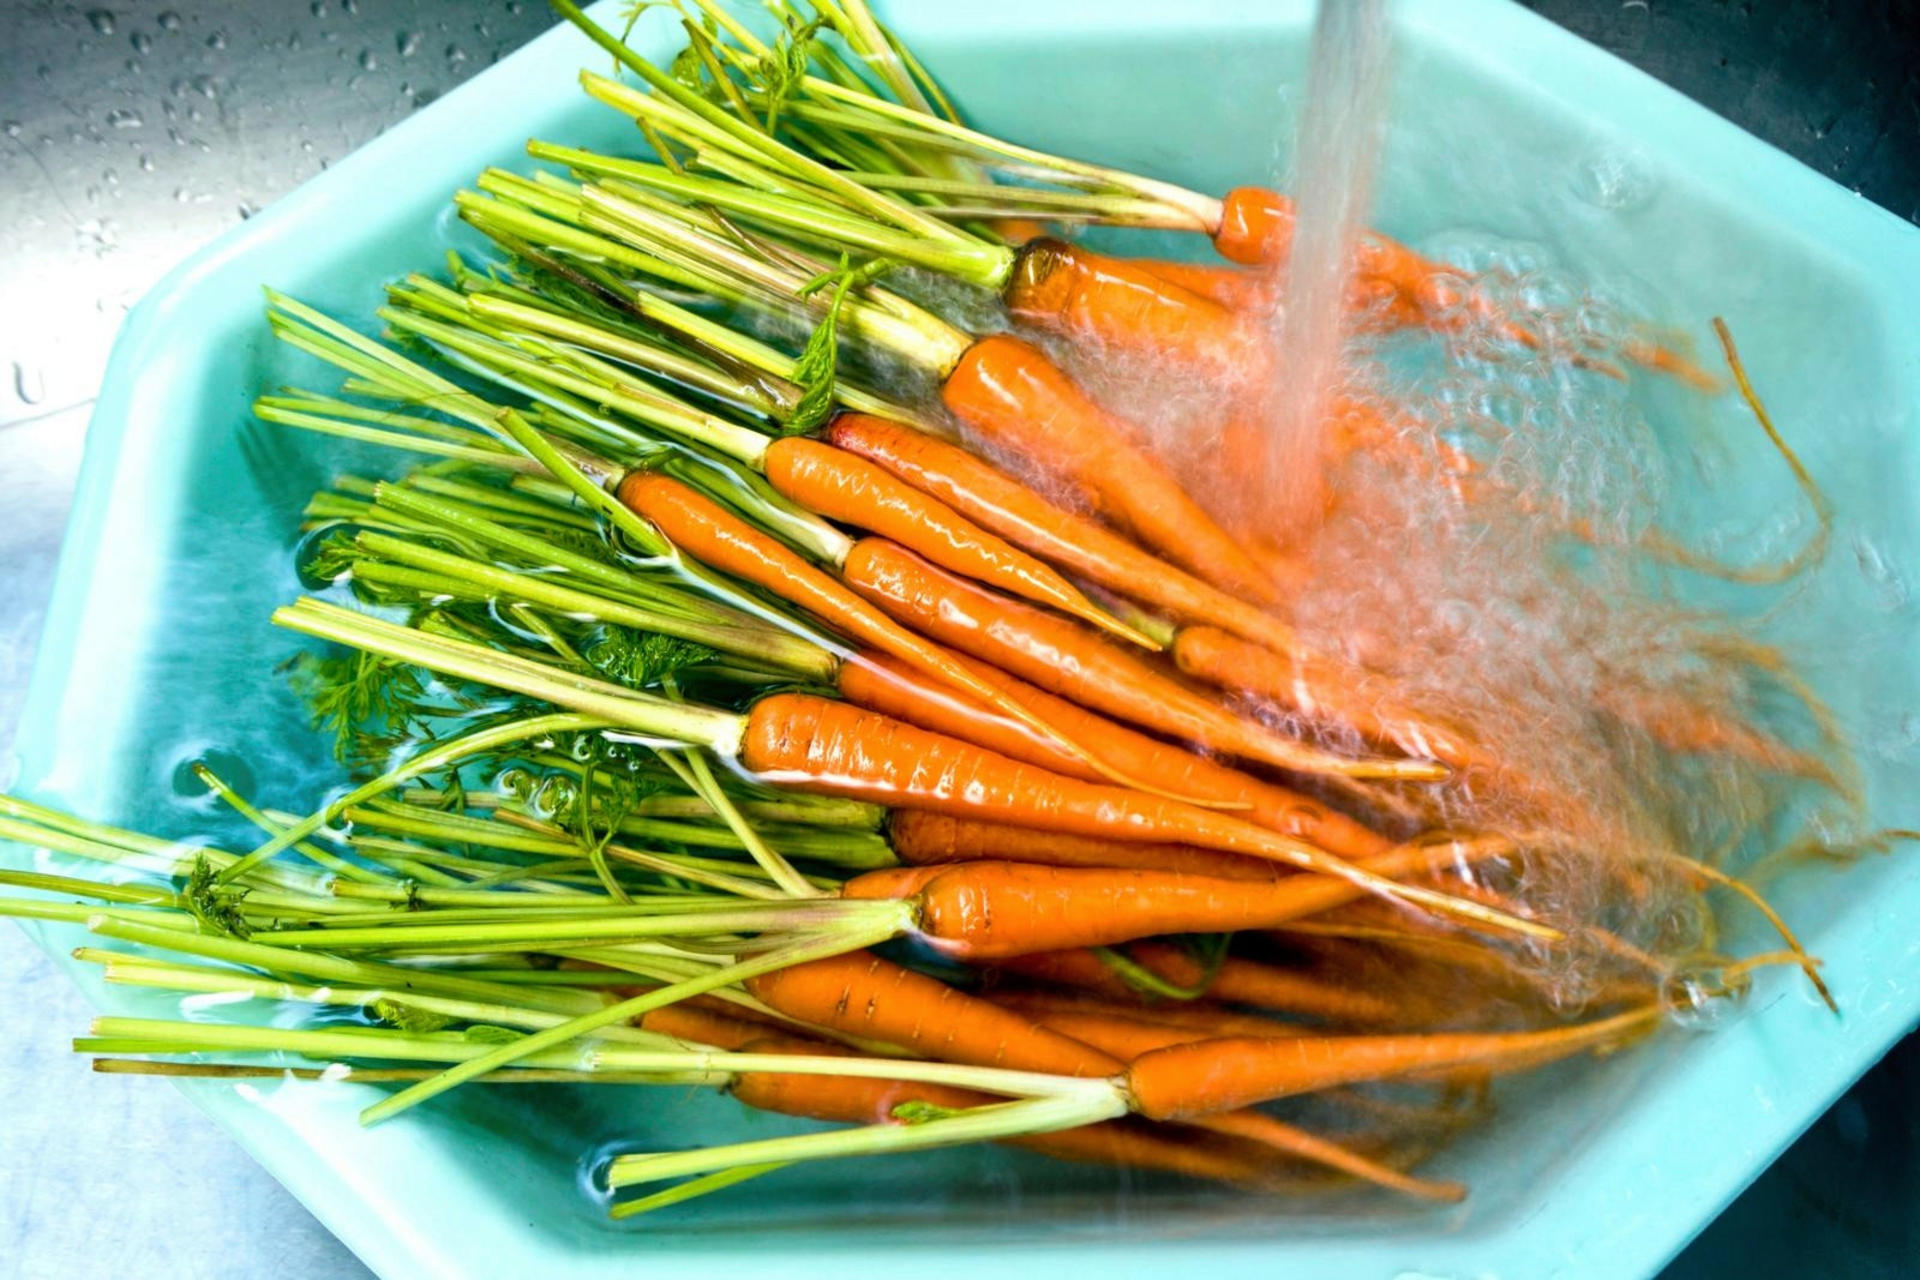 Many carrots in a sink, covered with water